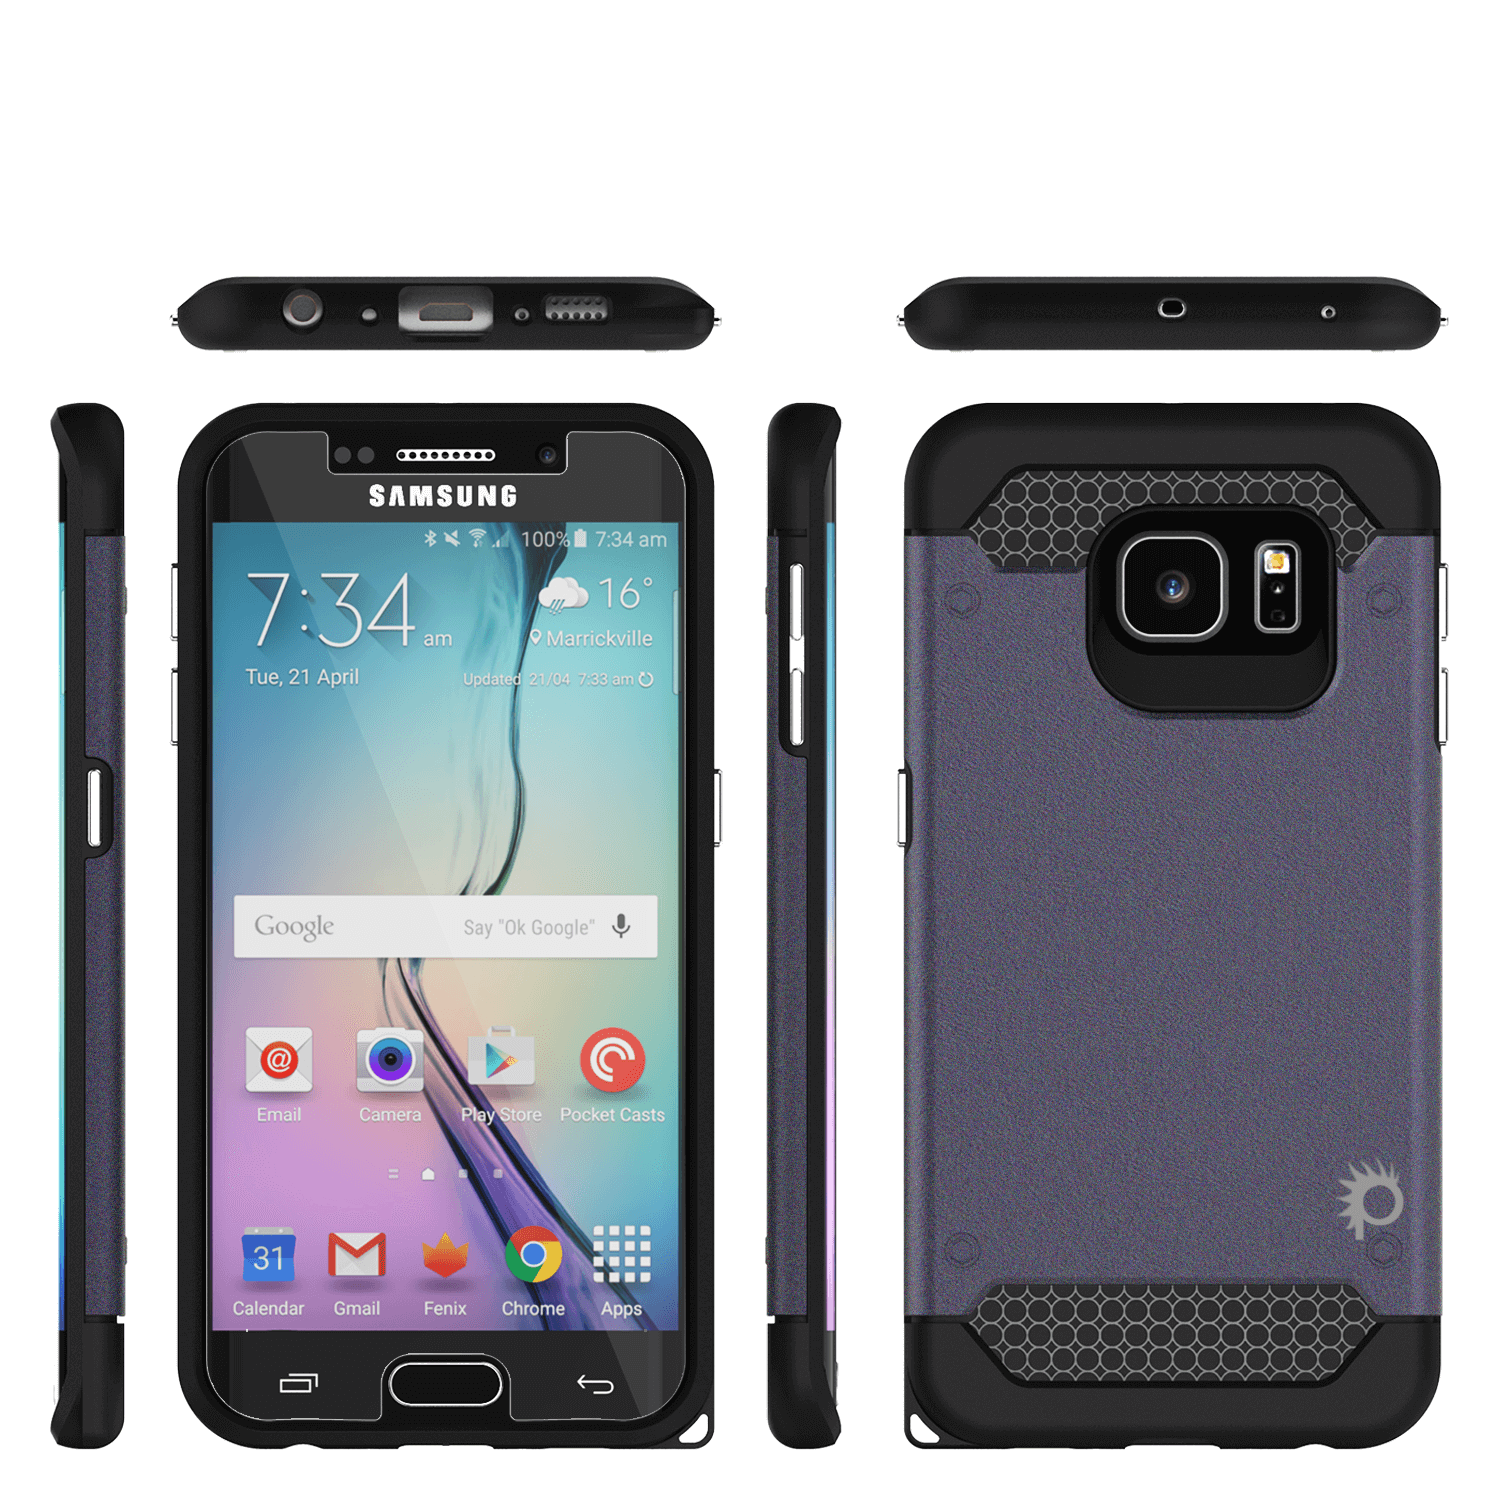 Galaxy s6 EDGE Case PunkCase Galactic Black Series Slim Armor Soft Cover w/ Screen Protector